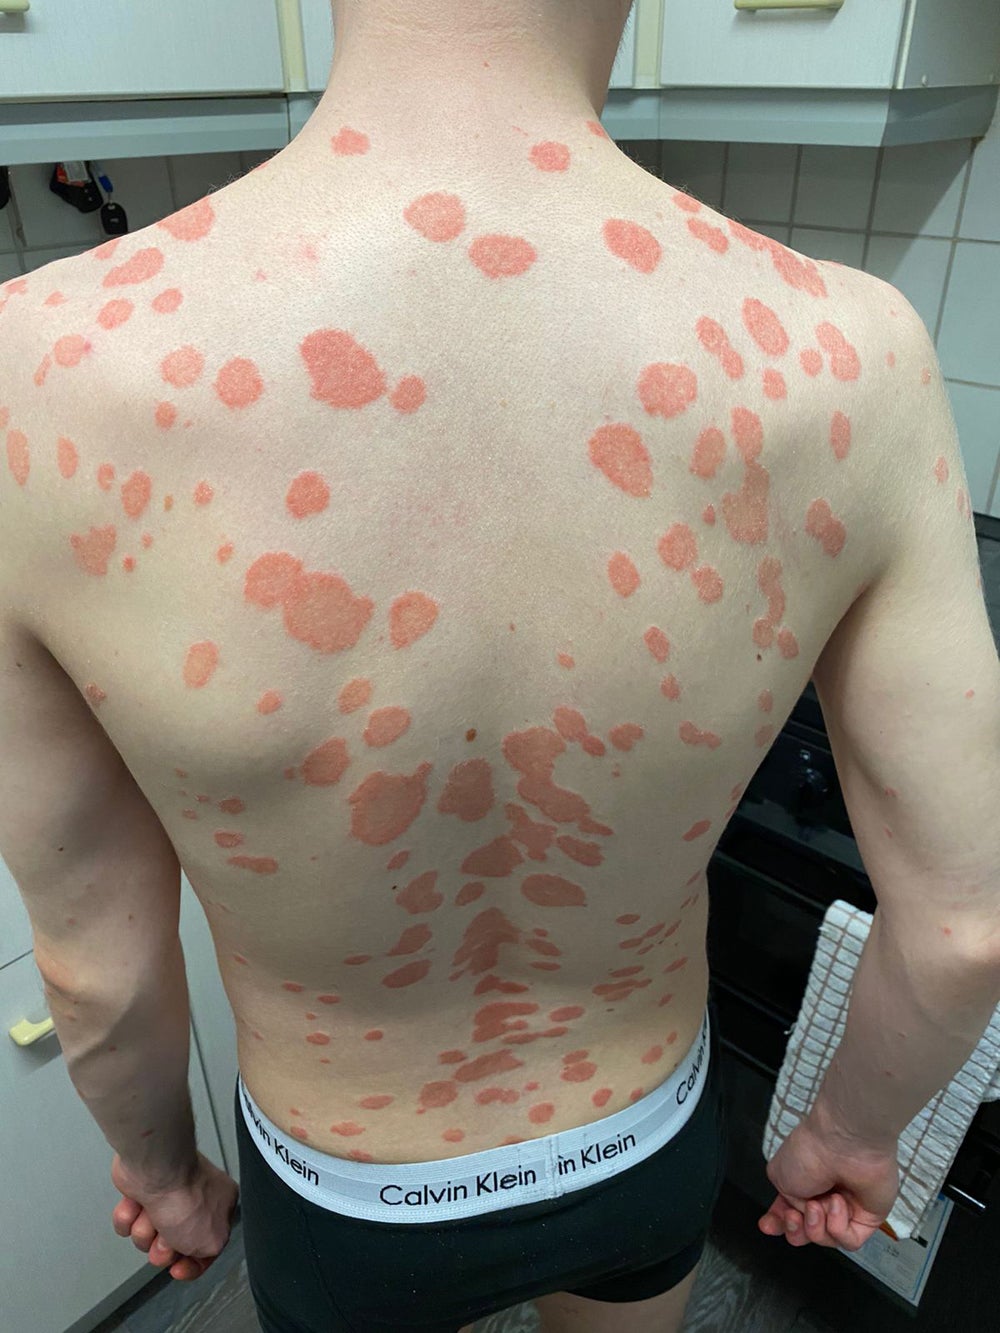 The psoriasis at its worst on Scot Cunningham’s back (Collect/PA Real Life)